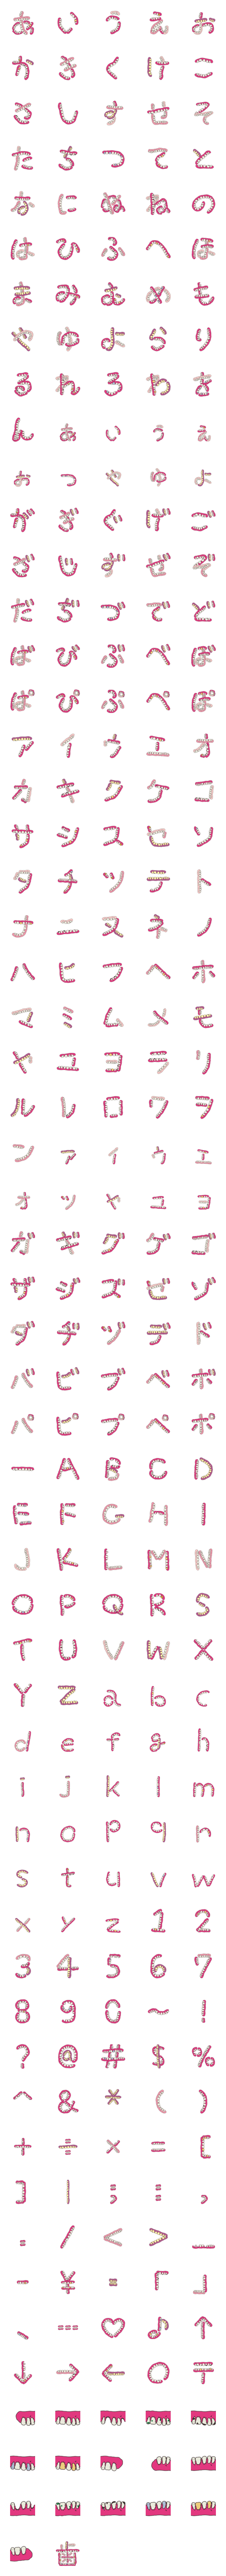 [LINE絵文字]歯デコ文字(かな、カナ英数字）の画像一覧